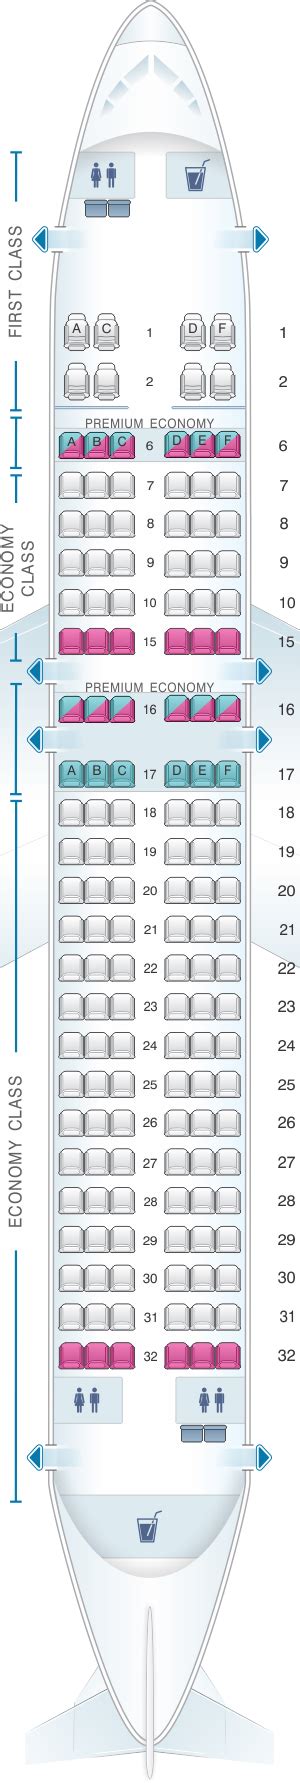 Alaska Airlines Seating Map Cabinets Matttroy